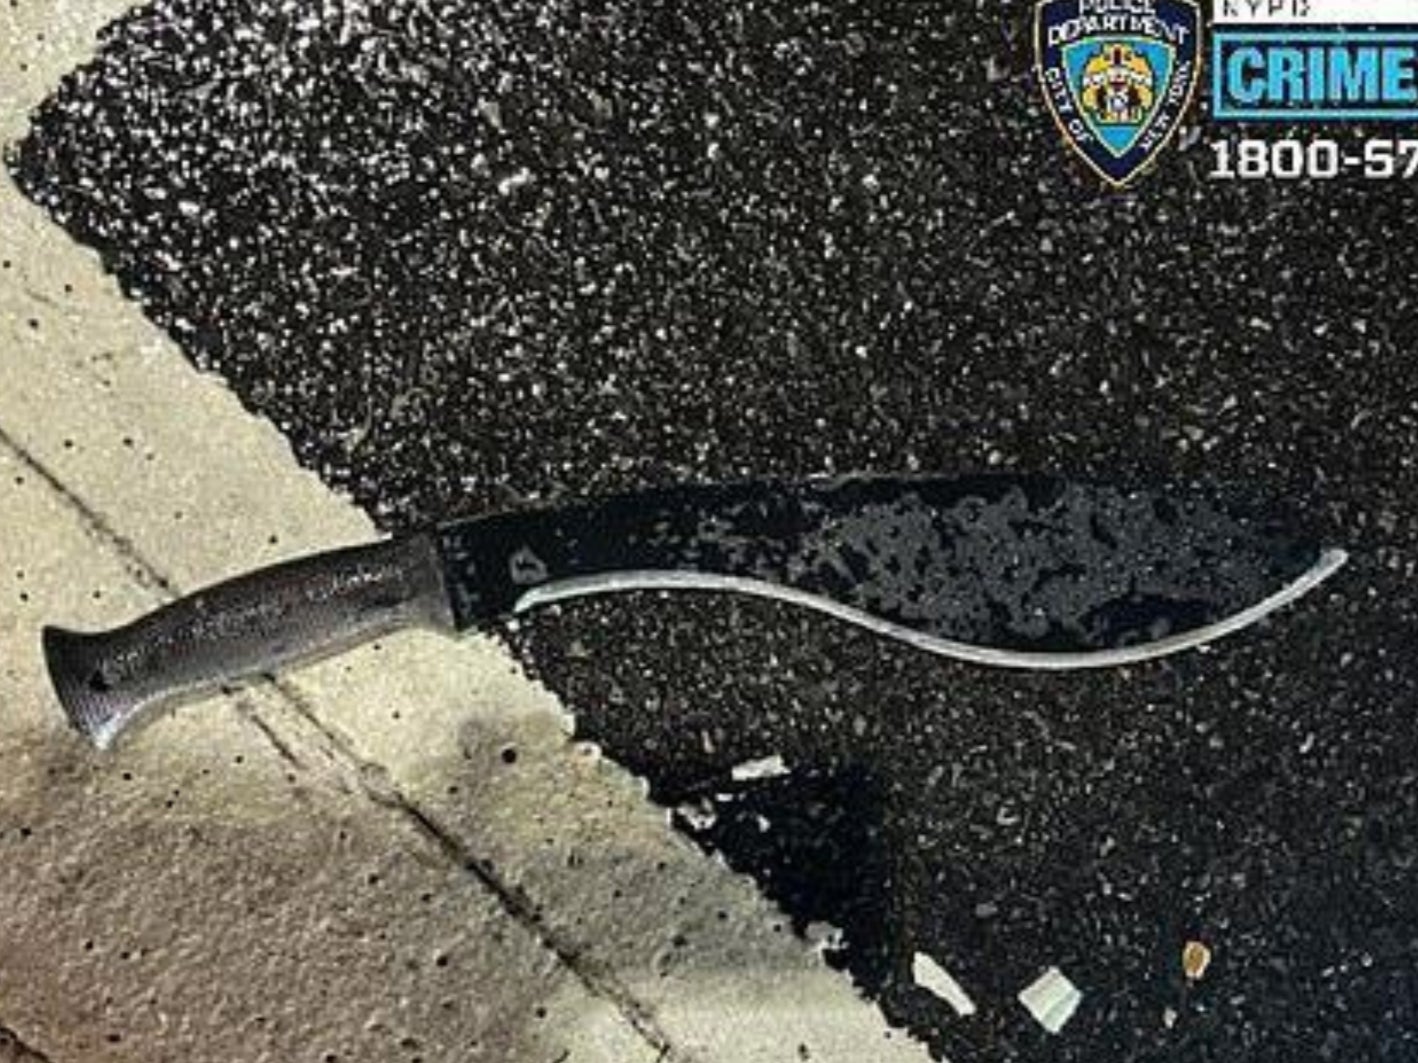 The machete used in a New Year’s Eve attack on NYPD officers near Times Square